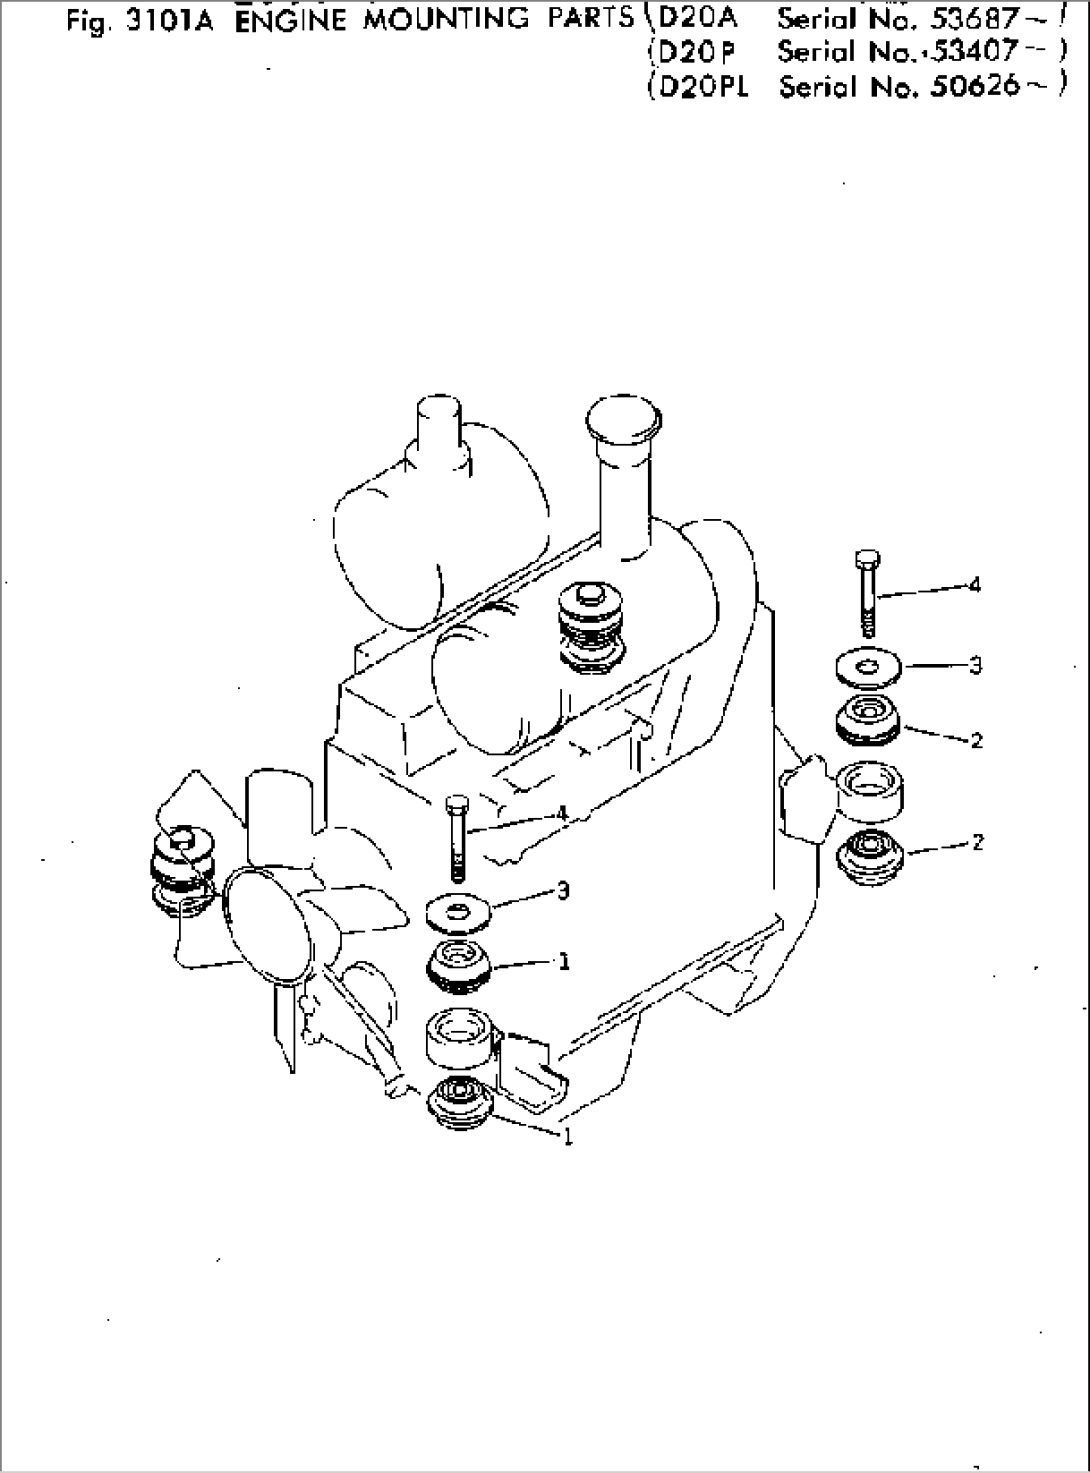 ENGINE MOUNTING PARTS(#53407-)